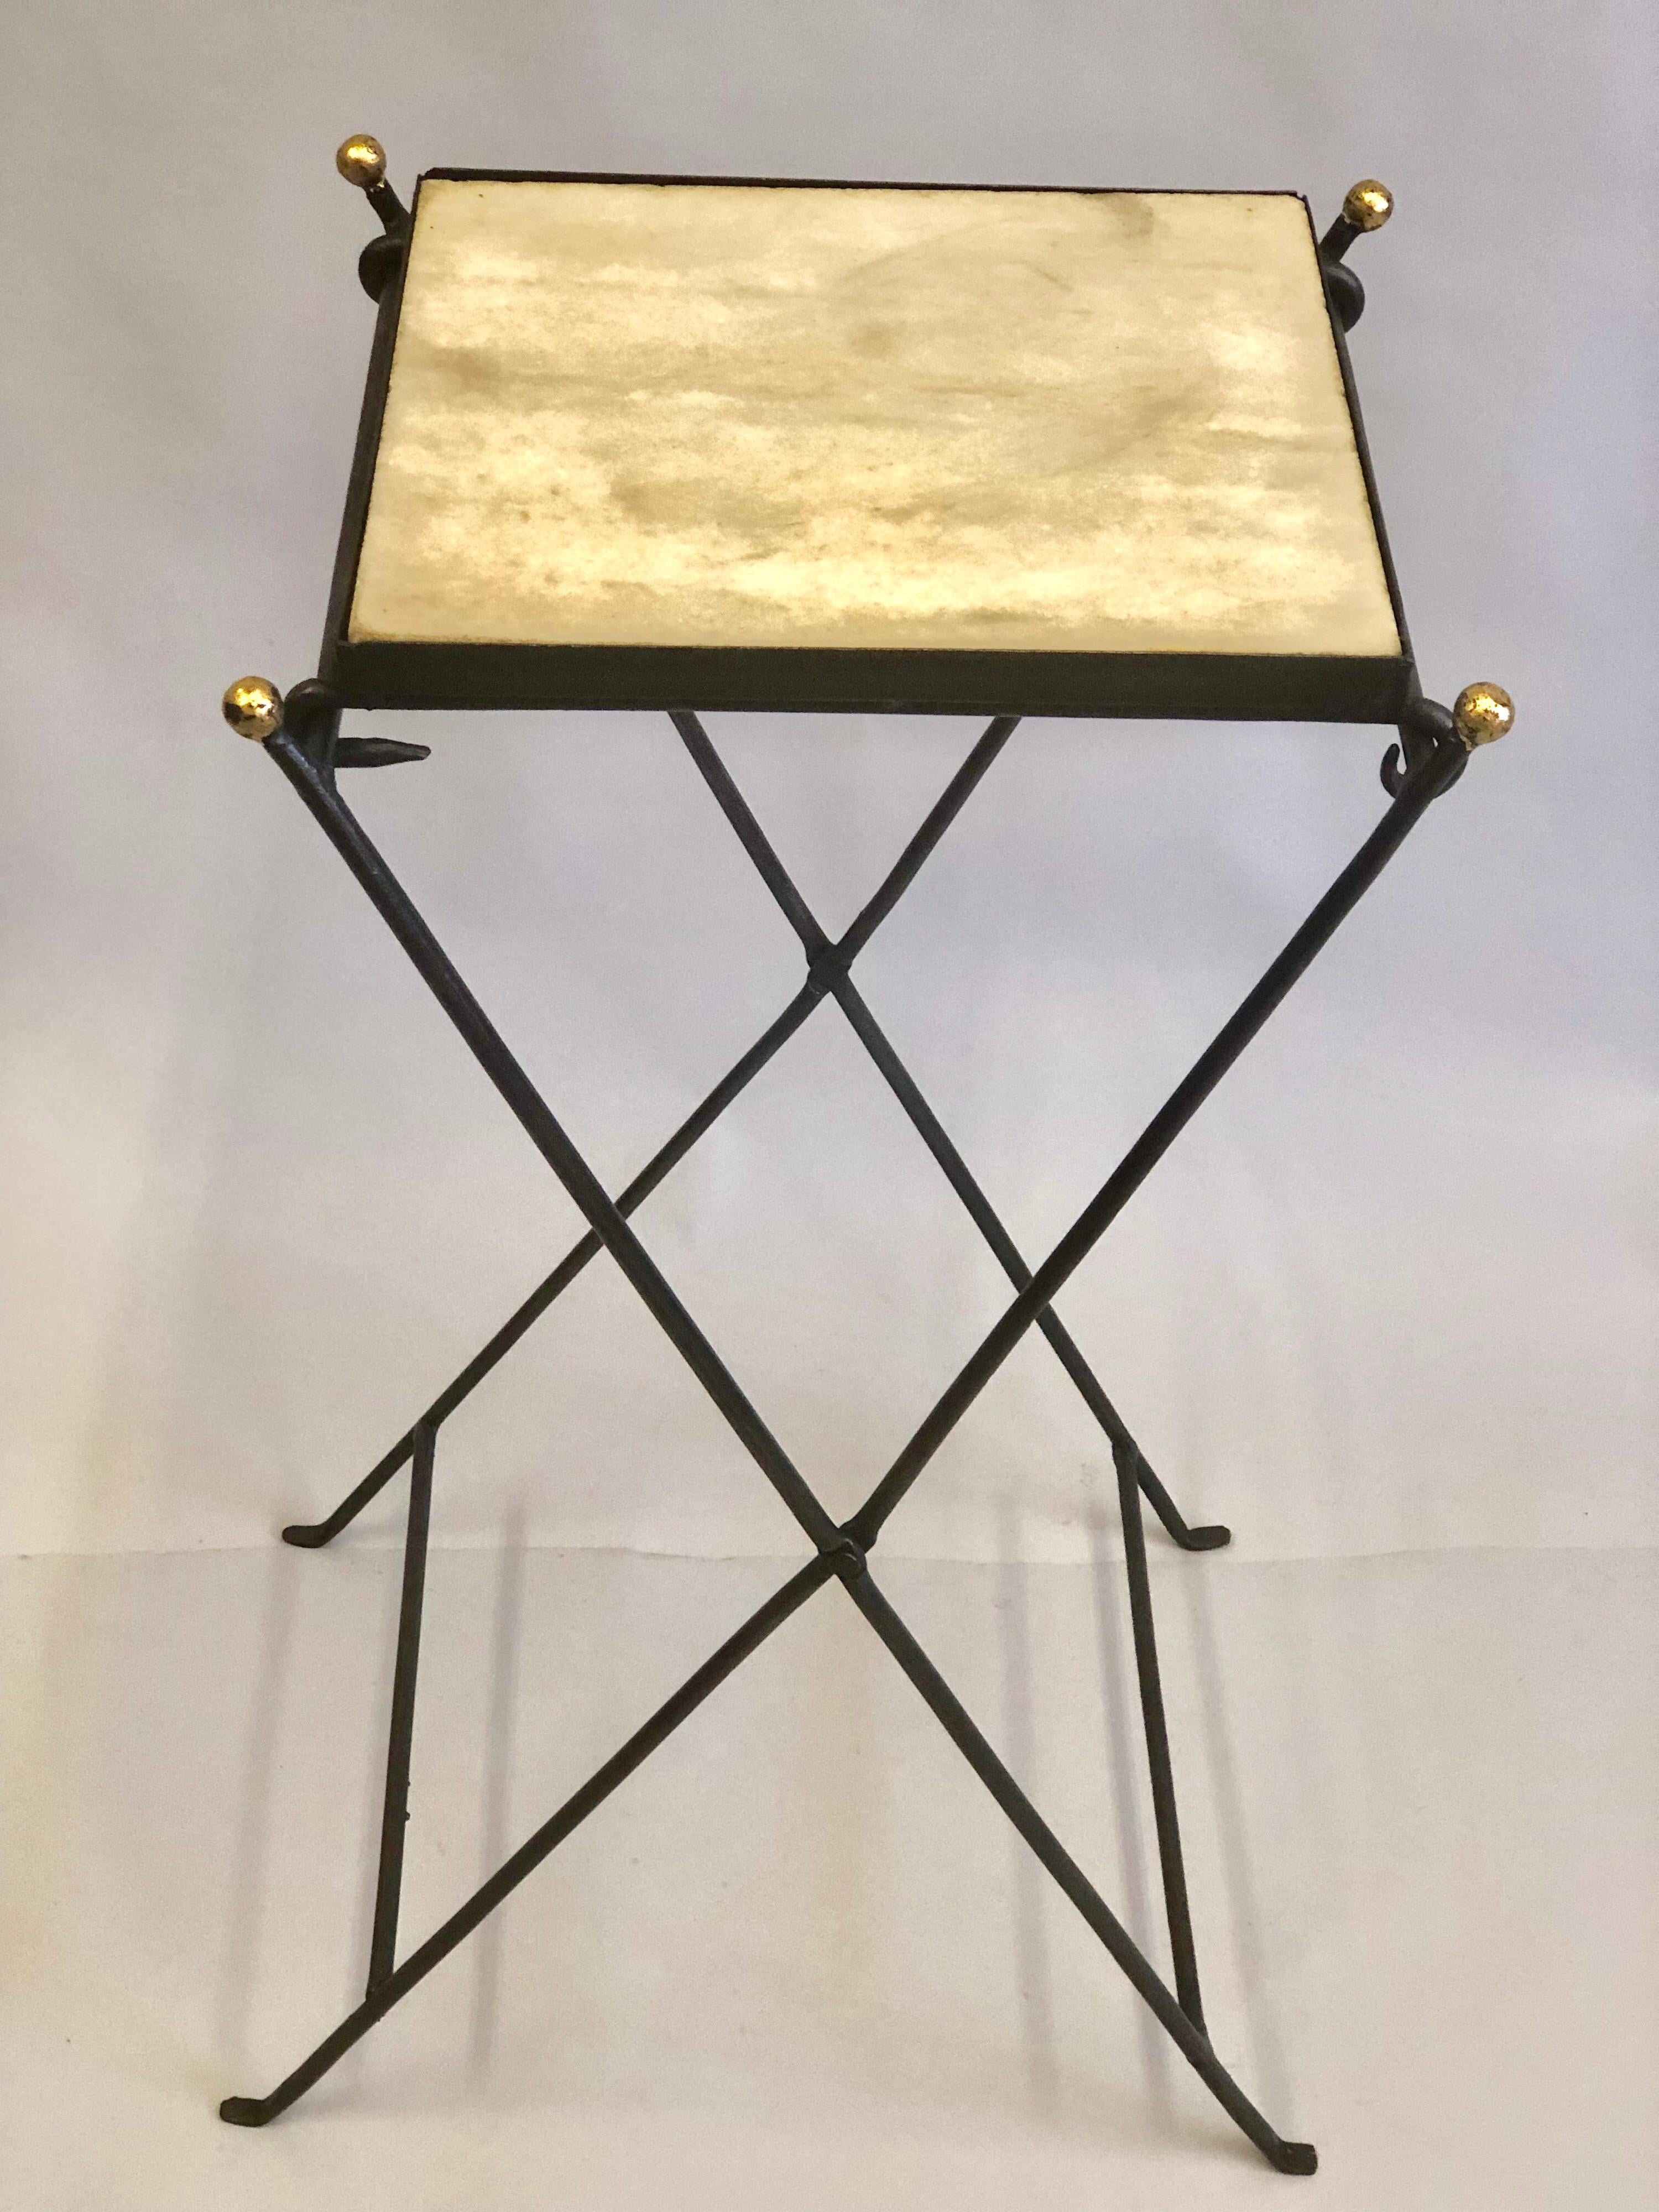 Elegant and unique French midcentury partially gilt wrought iron and marble folding side table or gueridon in the manner of Jean Michel Frank, circa 1935.

Though the folding 'campaign' table is composed of hammered iron and stone it is light and